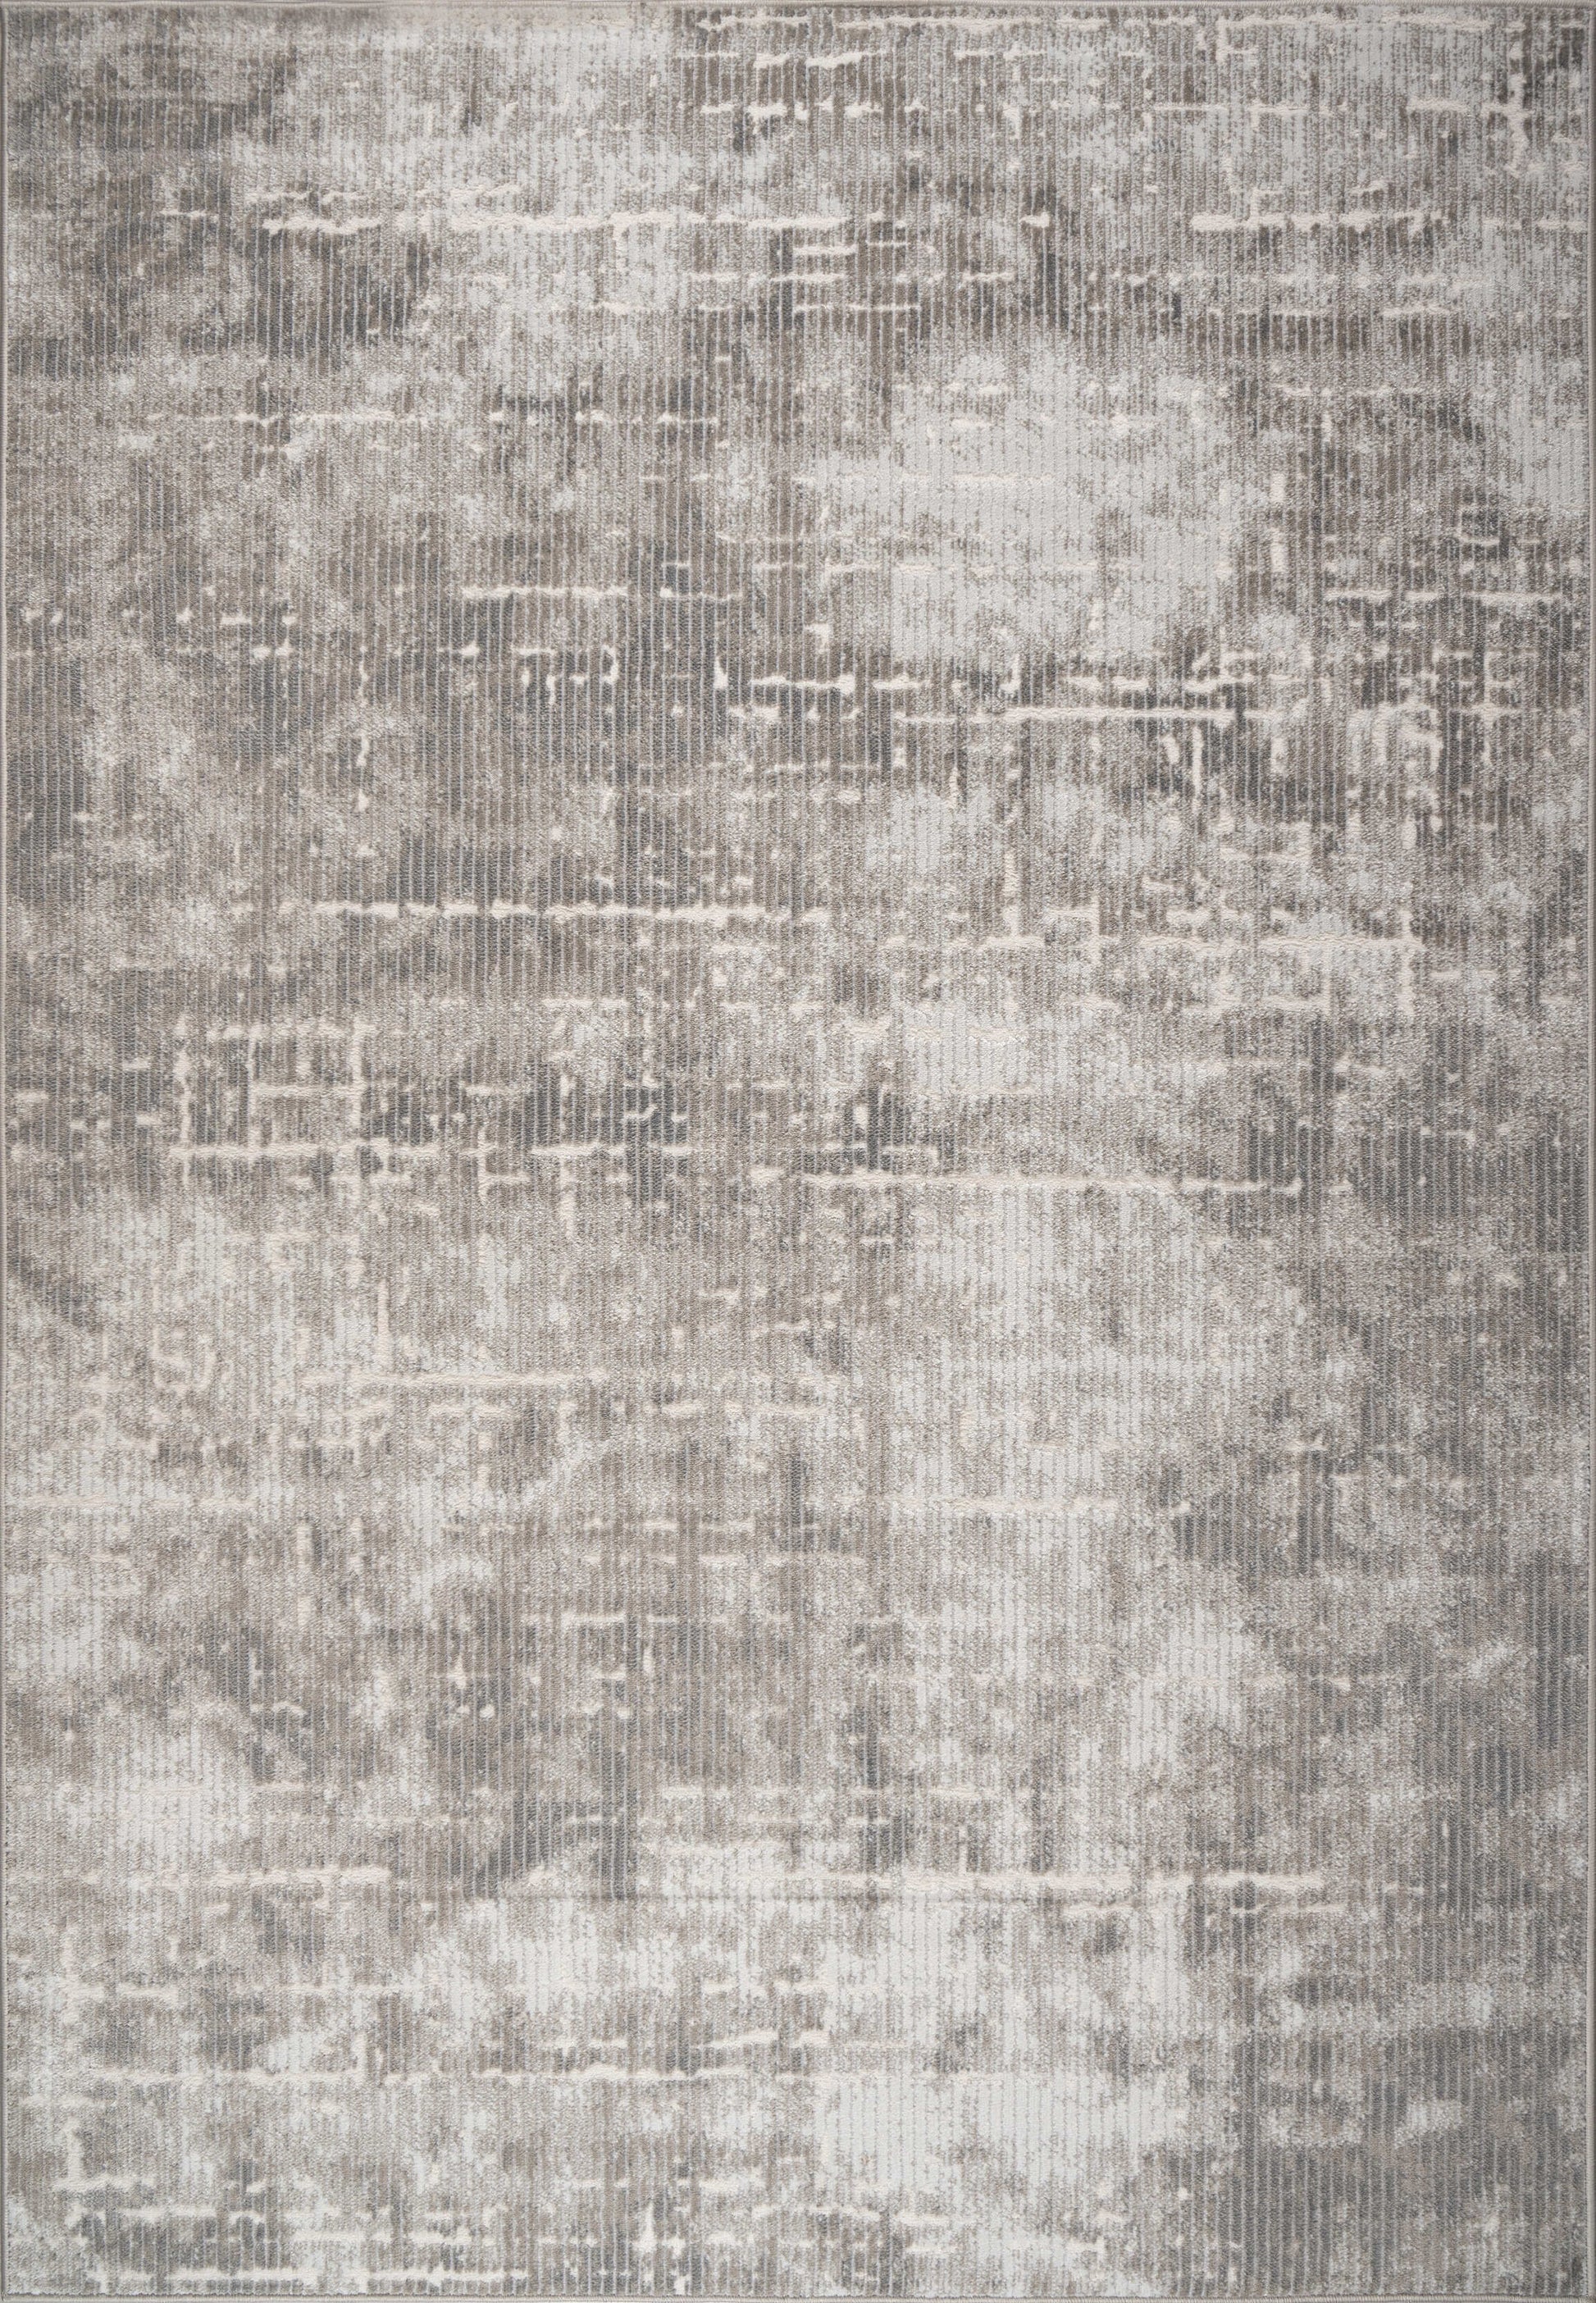 beige brown abstract rustic minimalist modern area rug for living room bedroom 2x8, 3x10, 2x10 ft Long Runner Rug, Hallway, Balcony, Entry Way, Kitchen, Stairs